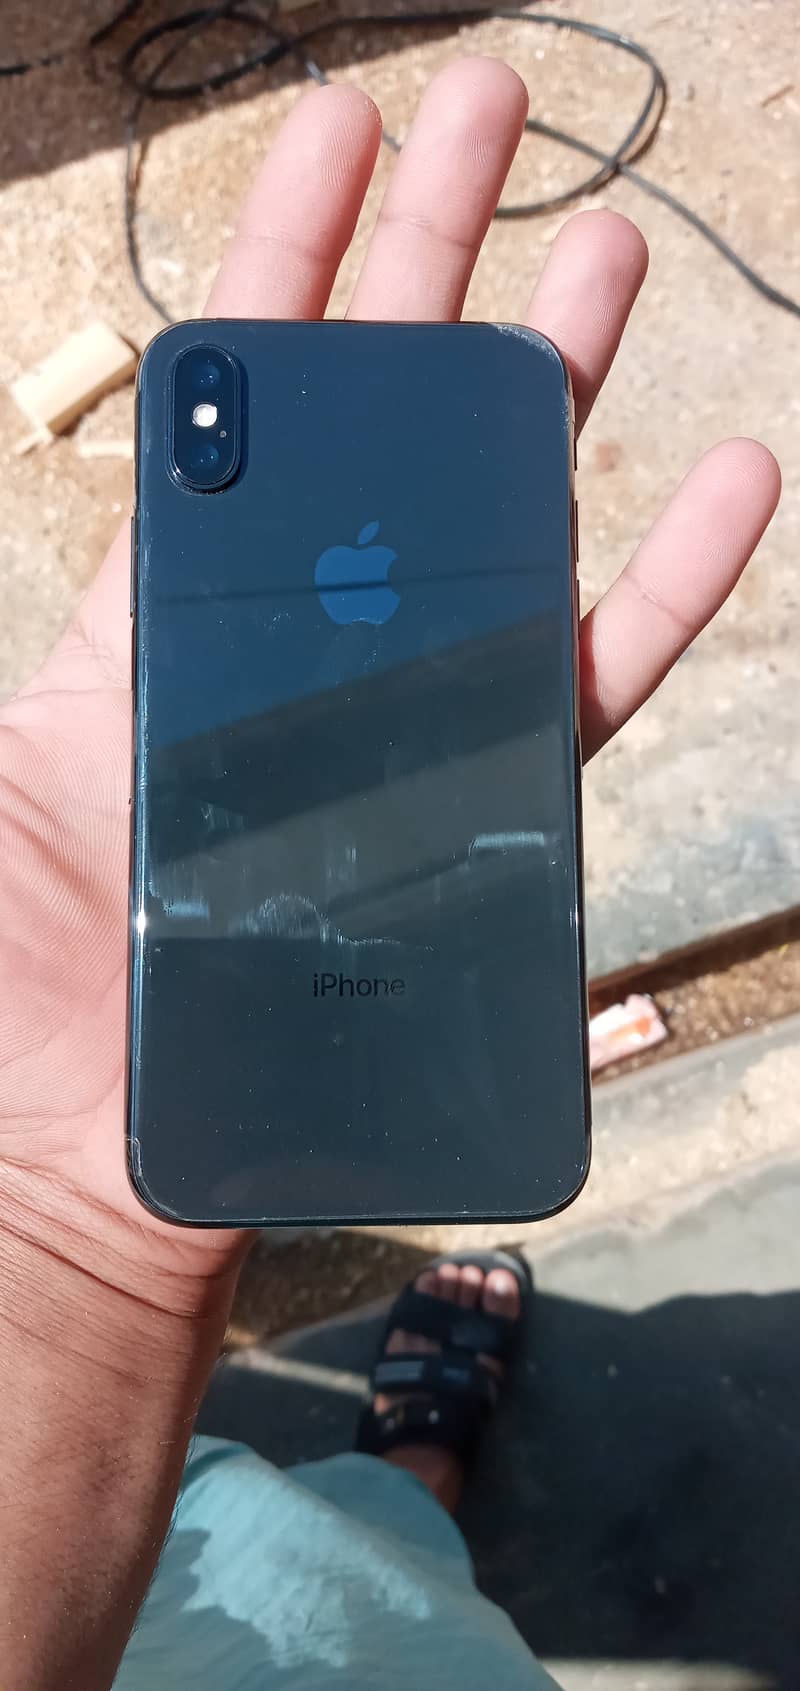 iphone x pta proof 256 gp batter health 86  10by 10 condition 1